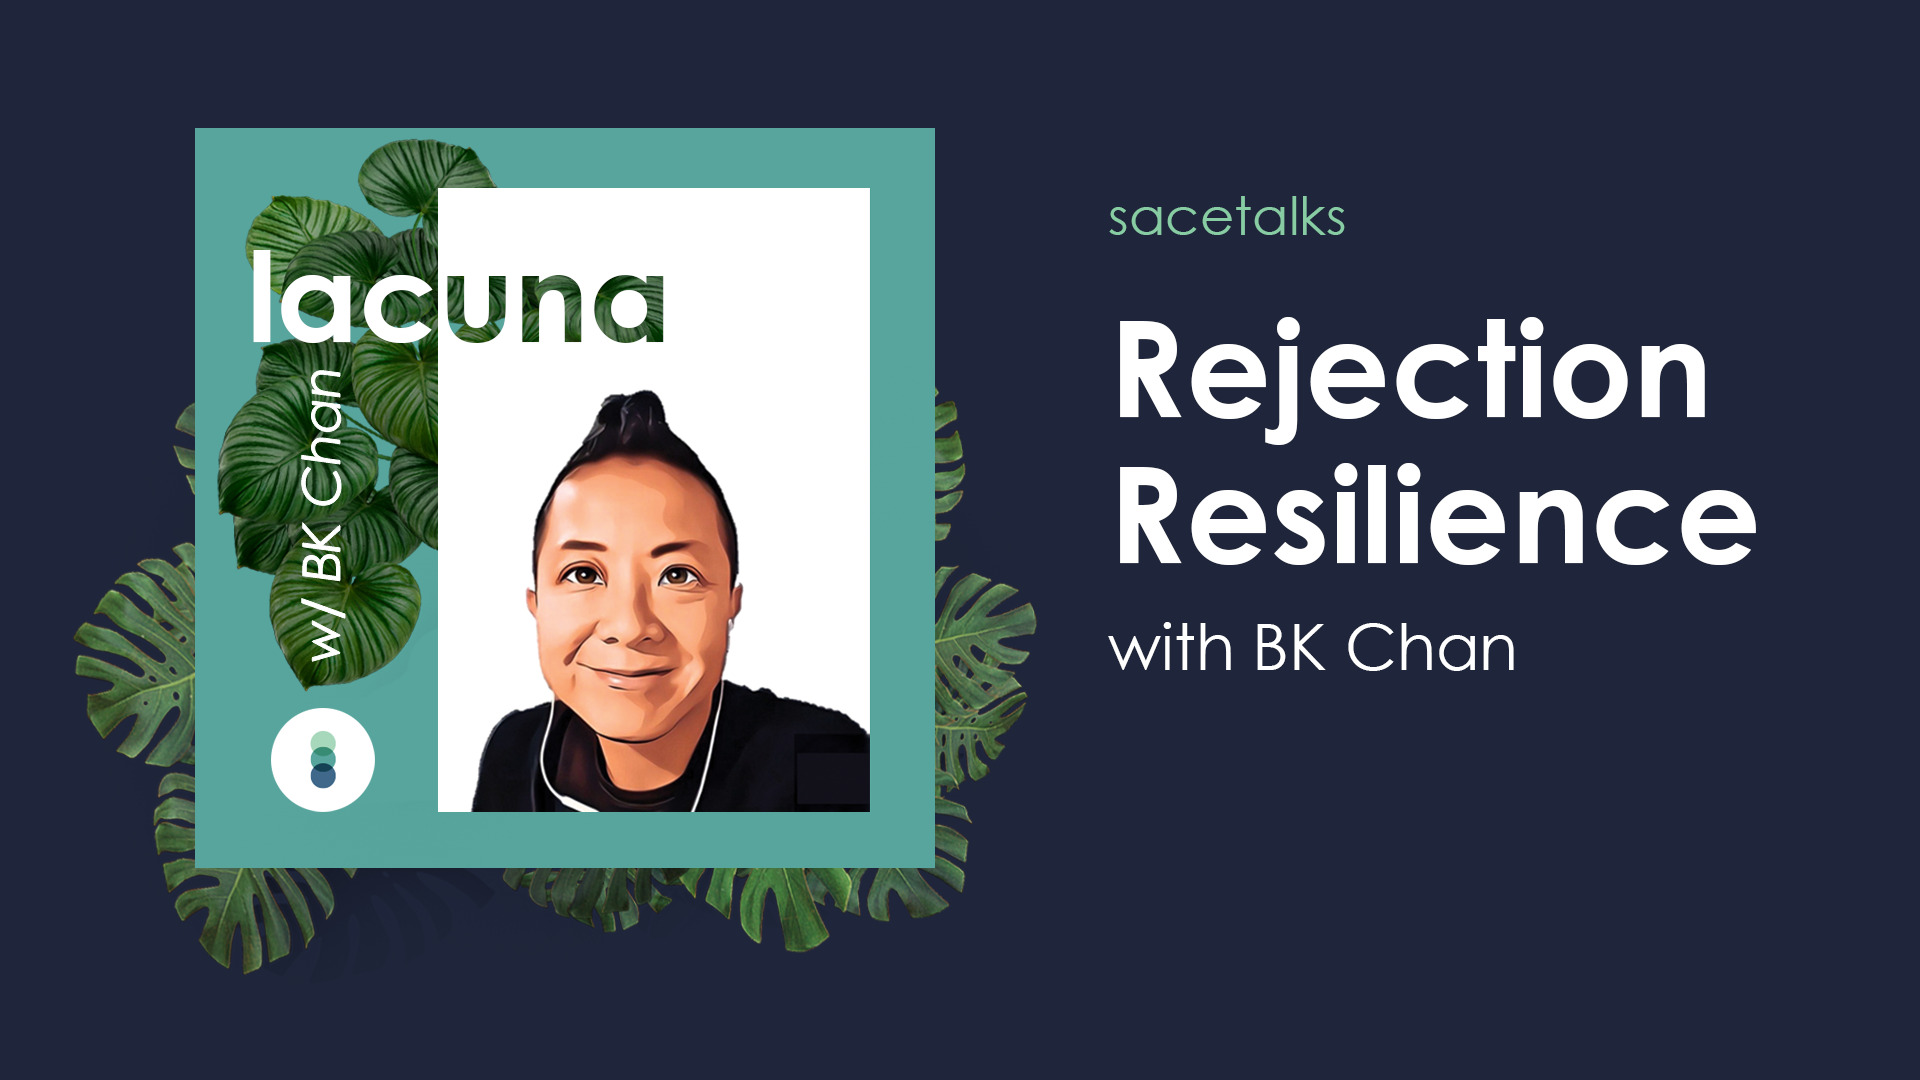 Navy blue background with green plant leaves surrounding an illustrated portrait of BK Chan on a mint green square and text that says "lacuna w/ BK Chan" and the SACE circle logo. Title text reads "sacetalks Rejection Resilience with BK Chan"